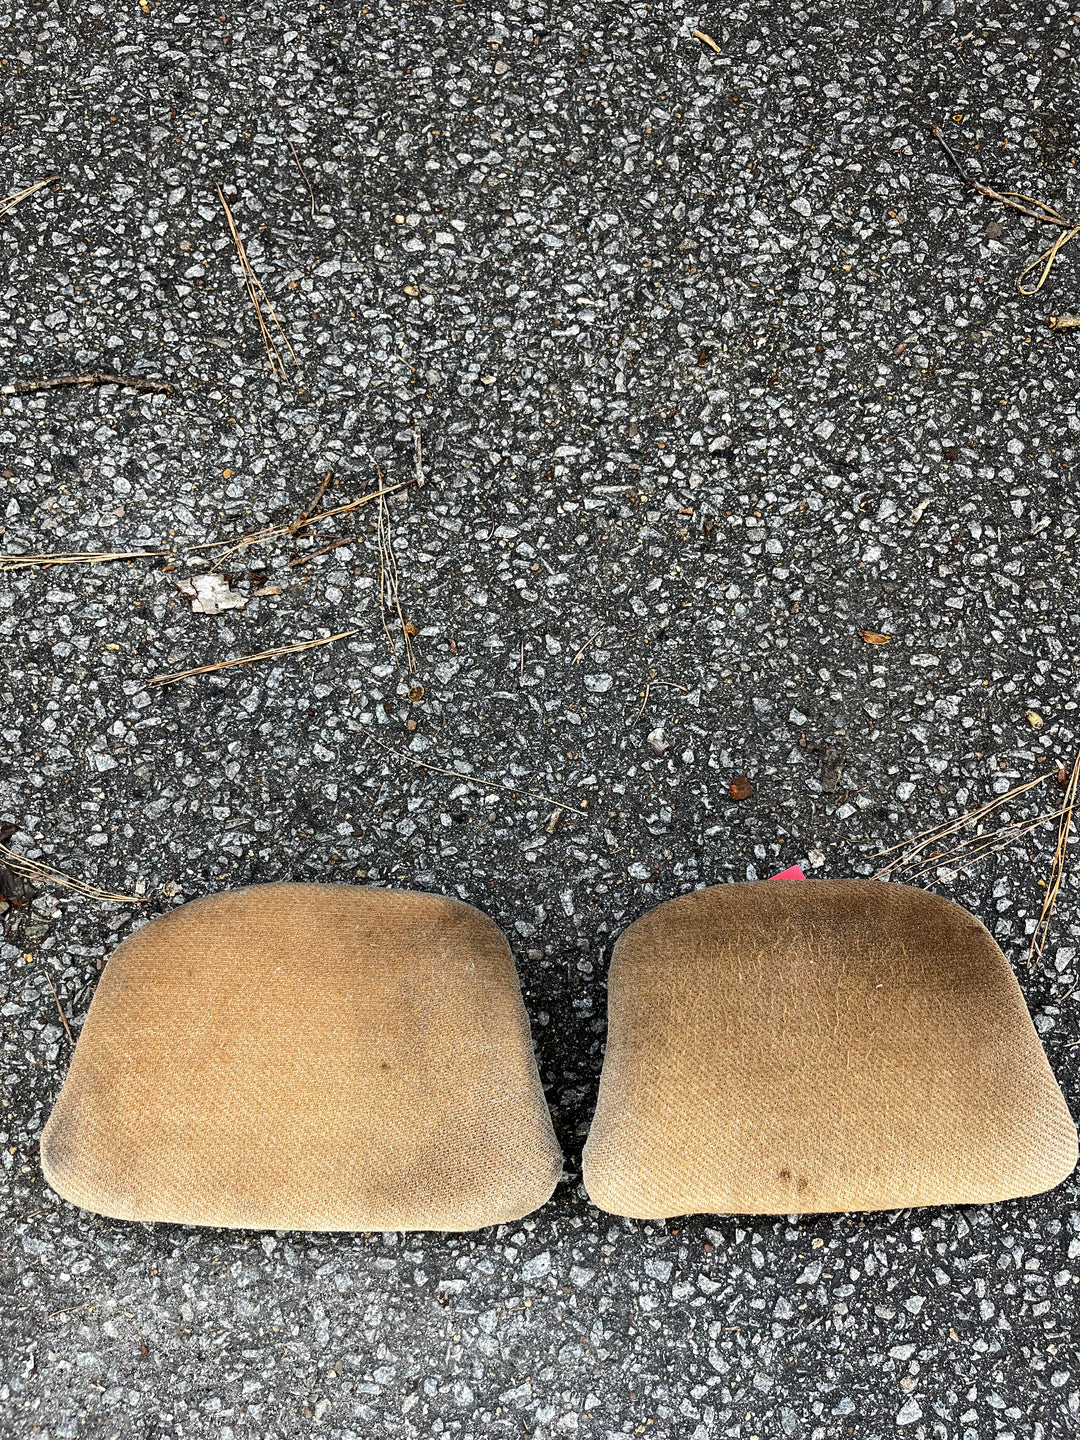 Volvo 240 Tan Headrest Covers Used